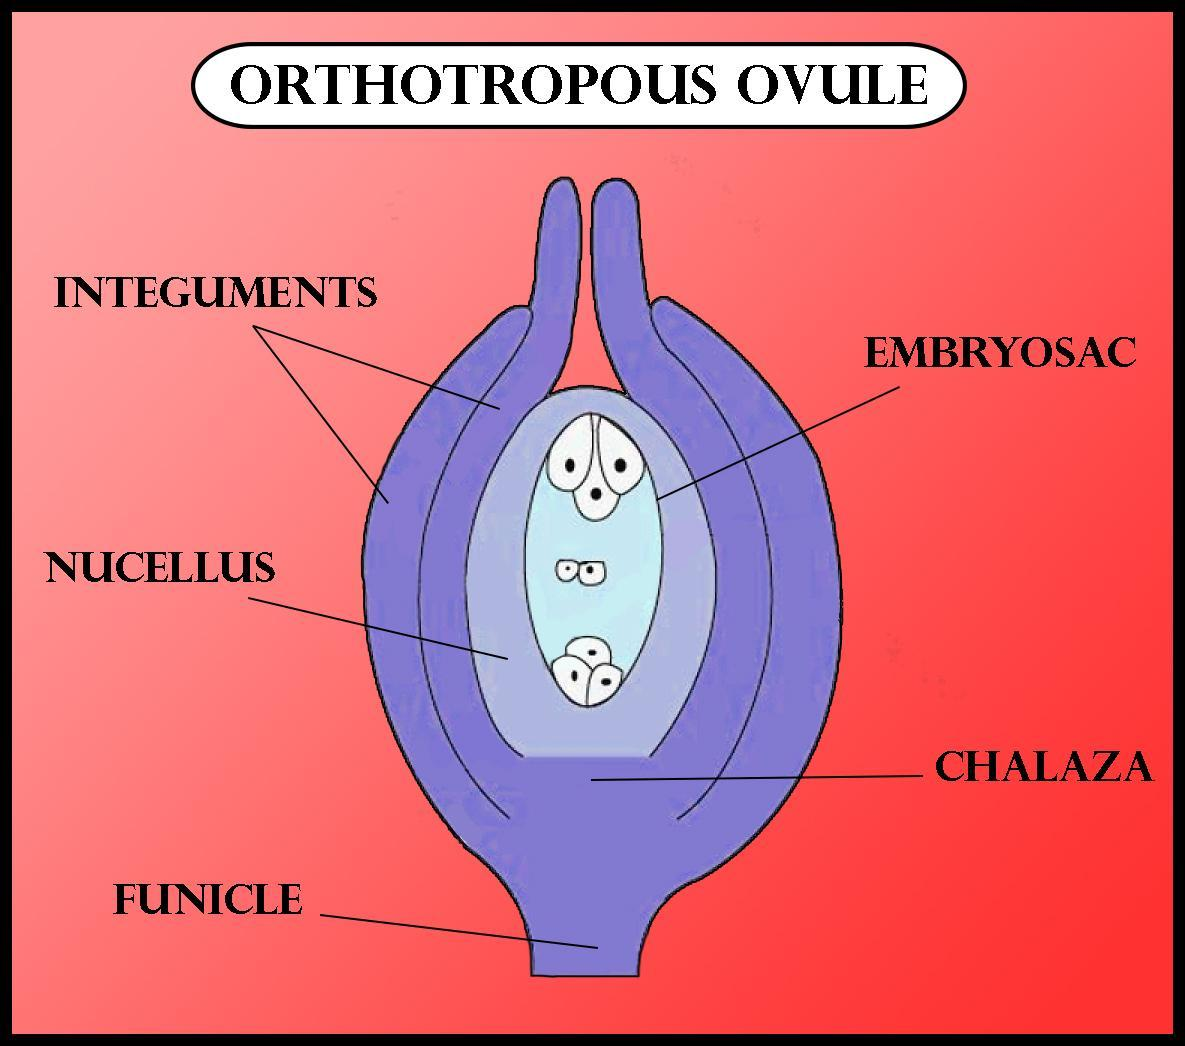 An orthotropous ovule is one, in which micropyle and chalaza are(a) In the straight line of a funiculus(b) Parallel to the funiculus(c) At right angles to the funiculus(d) Oblique to the funiculus